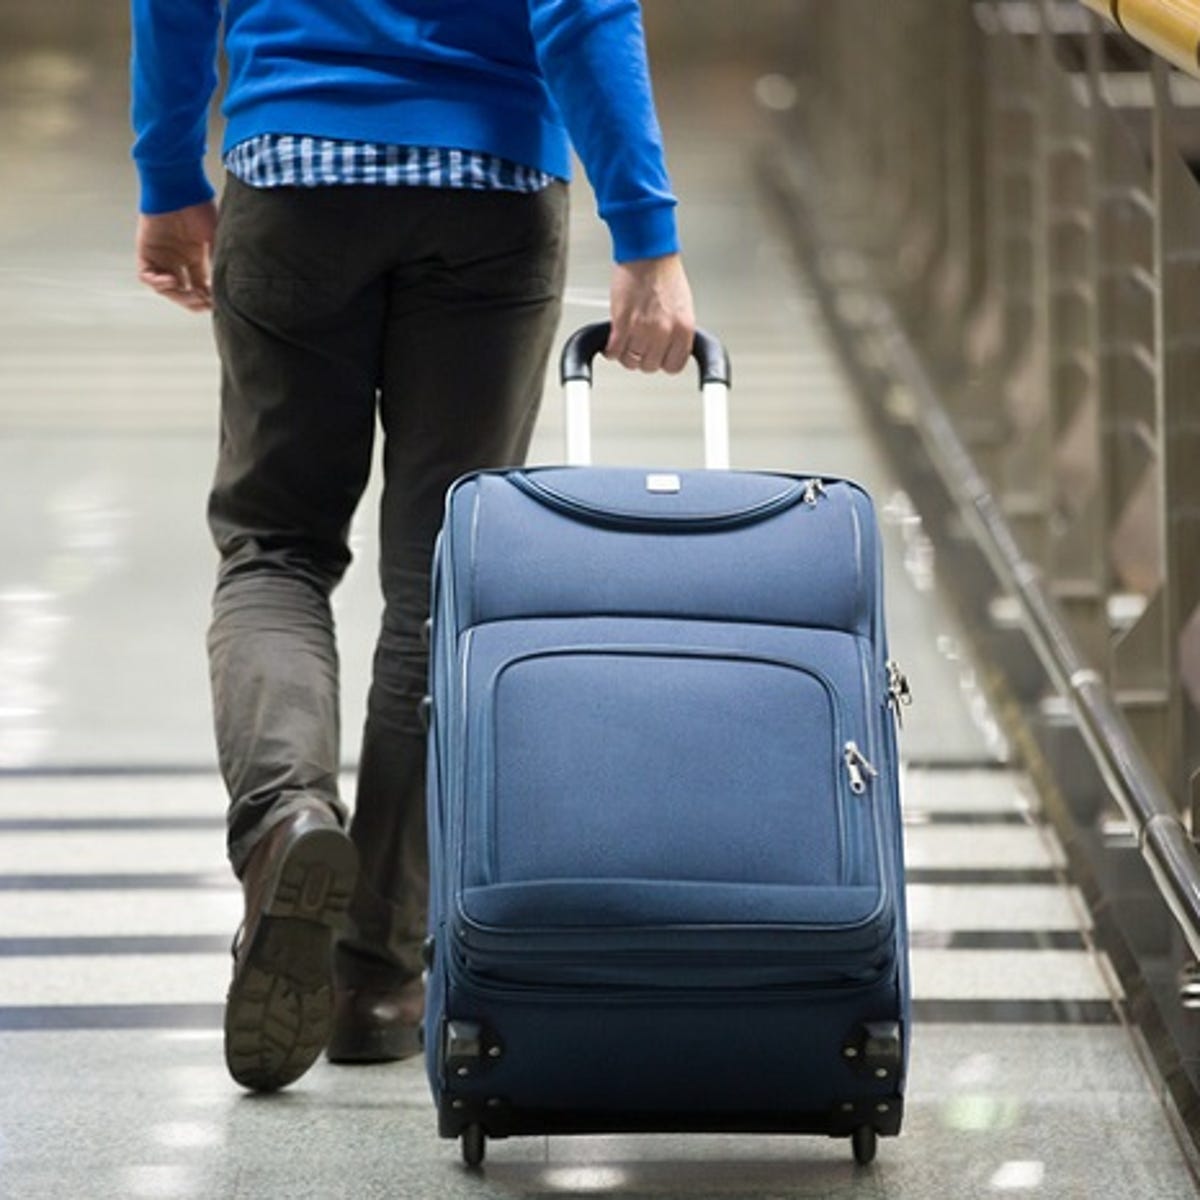 Flying with a smart suitcase: Every major airline's travel policy